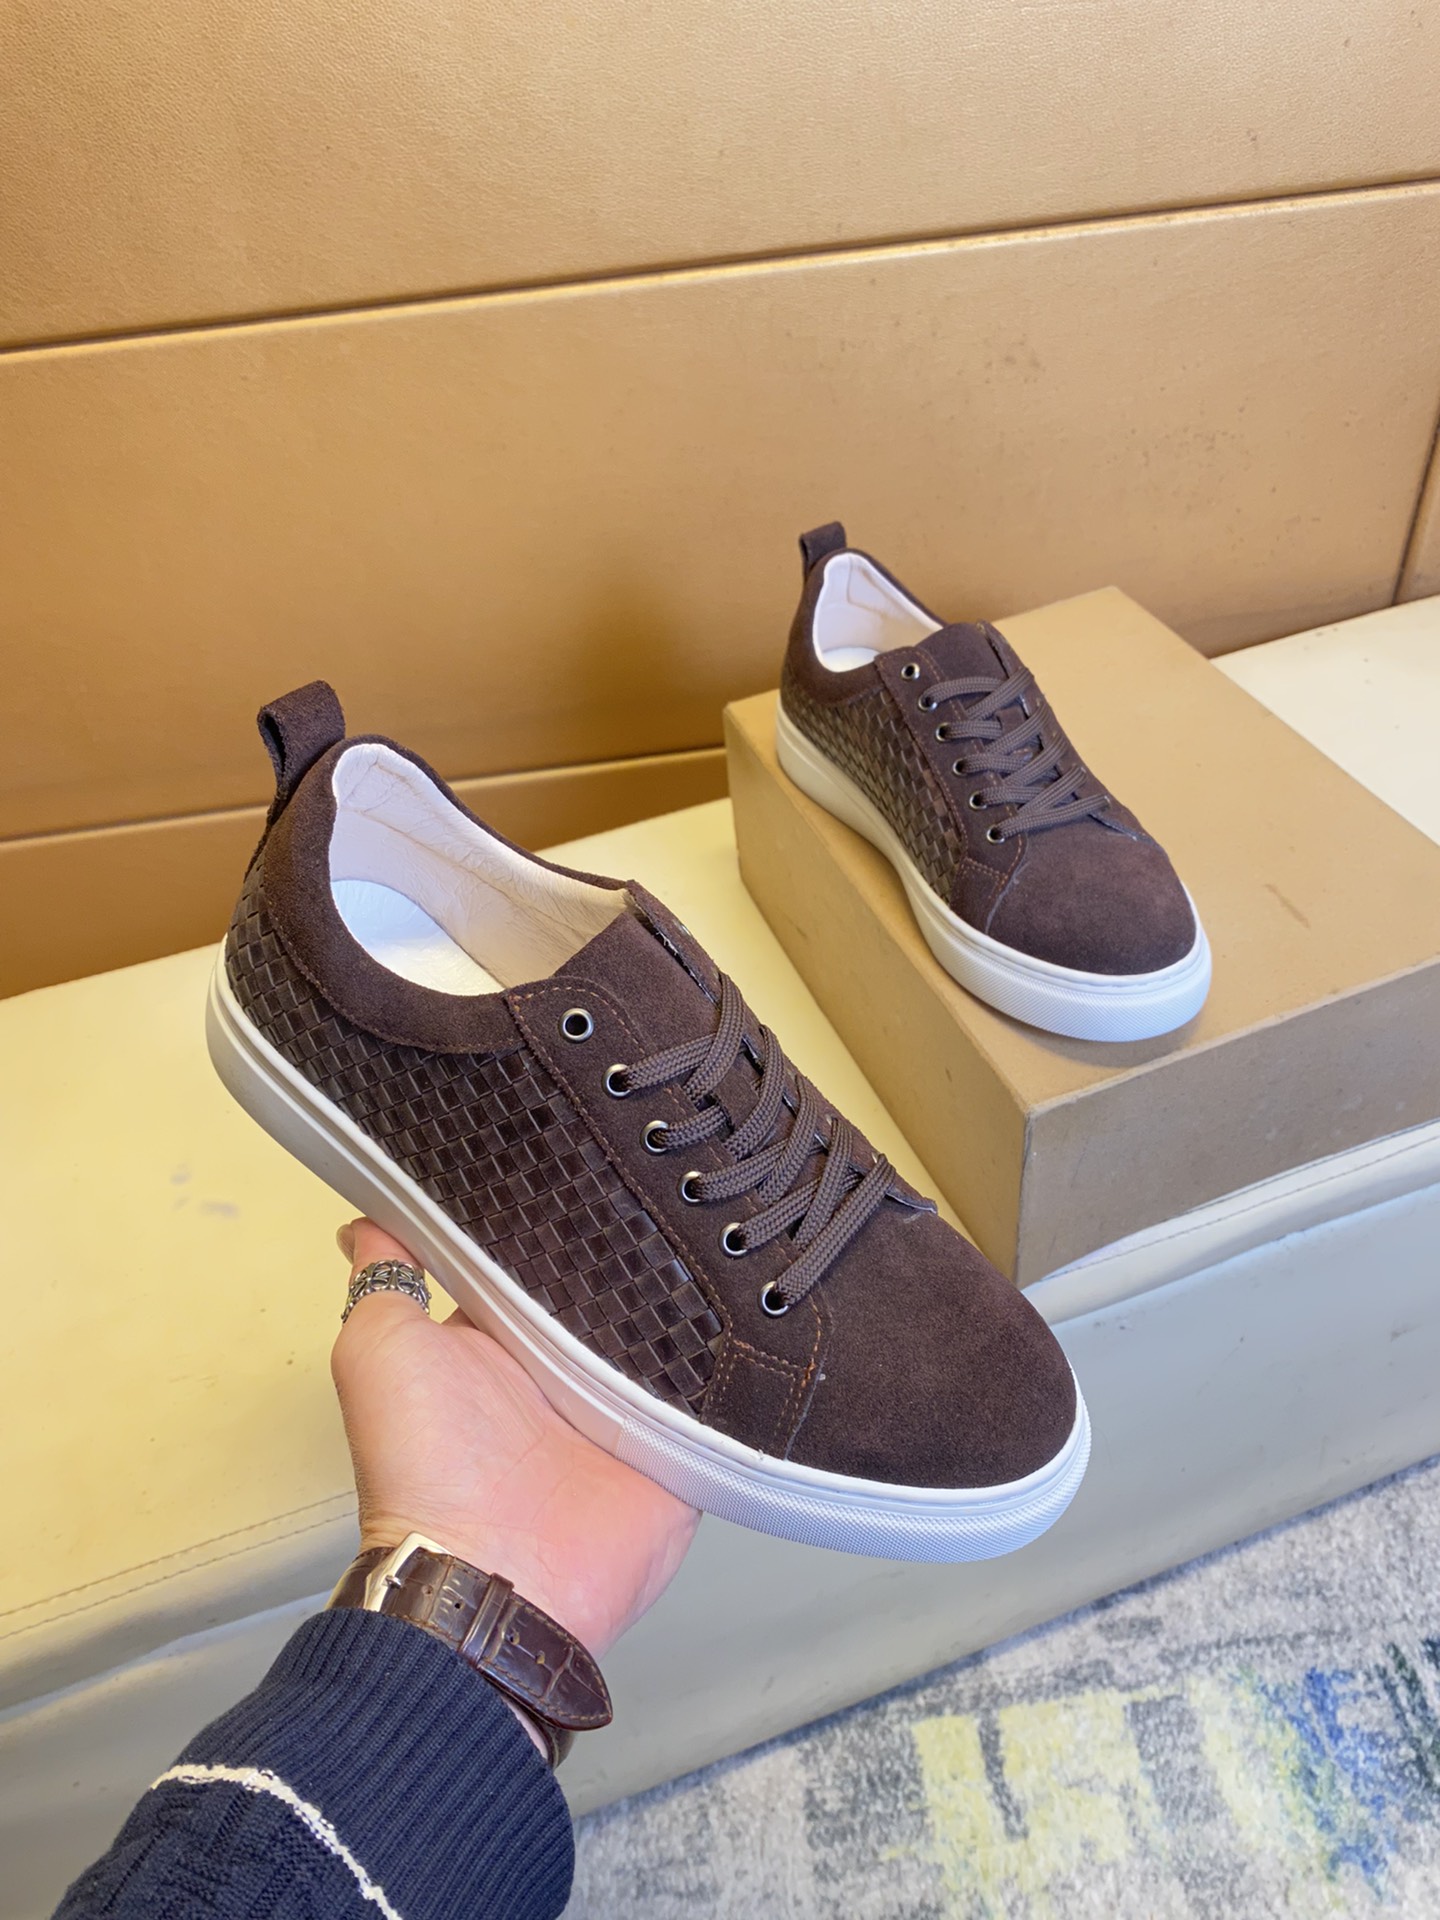 Exclusive first release of Fen ~ unique modern style sneakers. Special counter purchase for leisure.